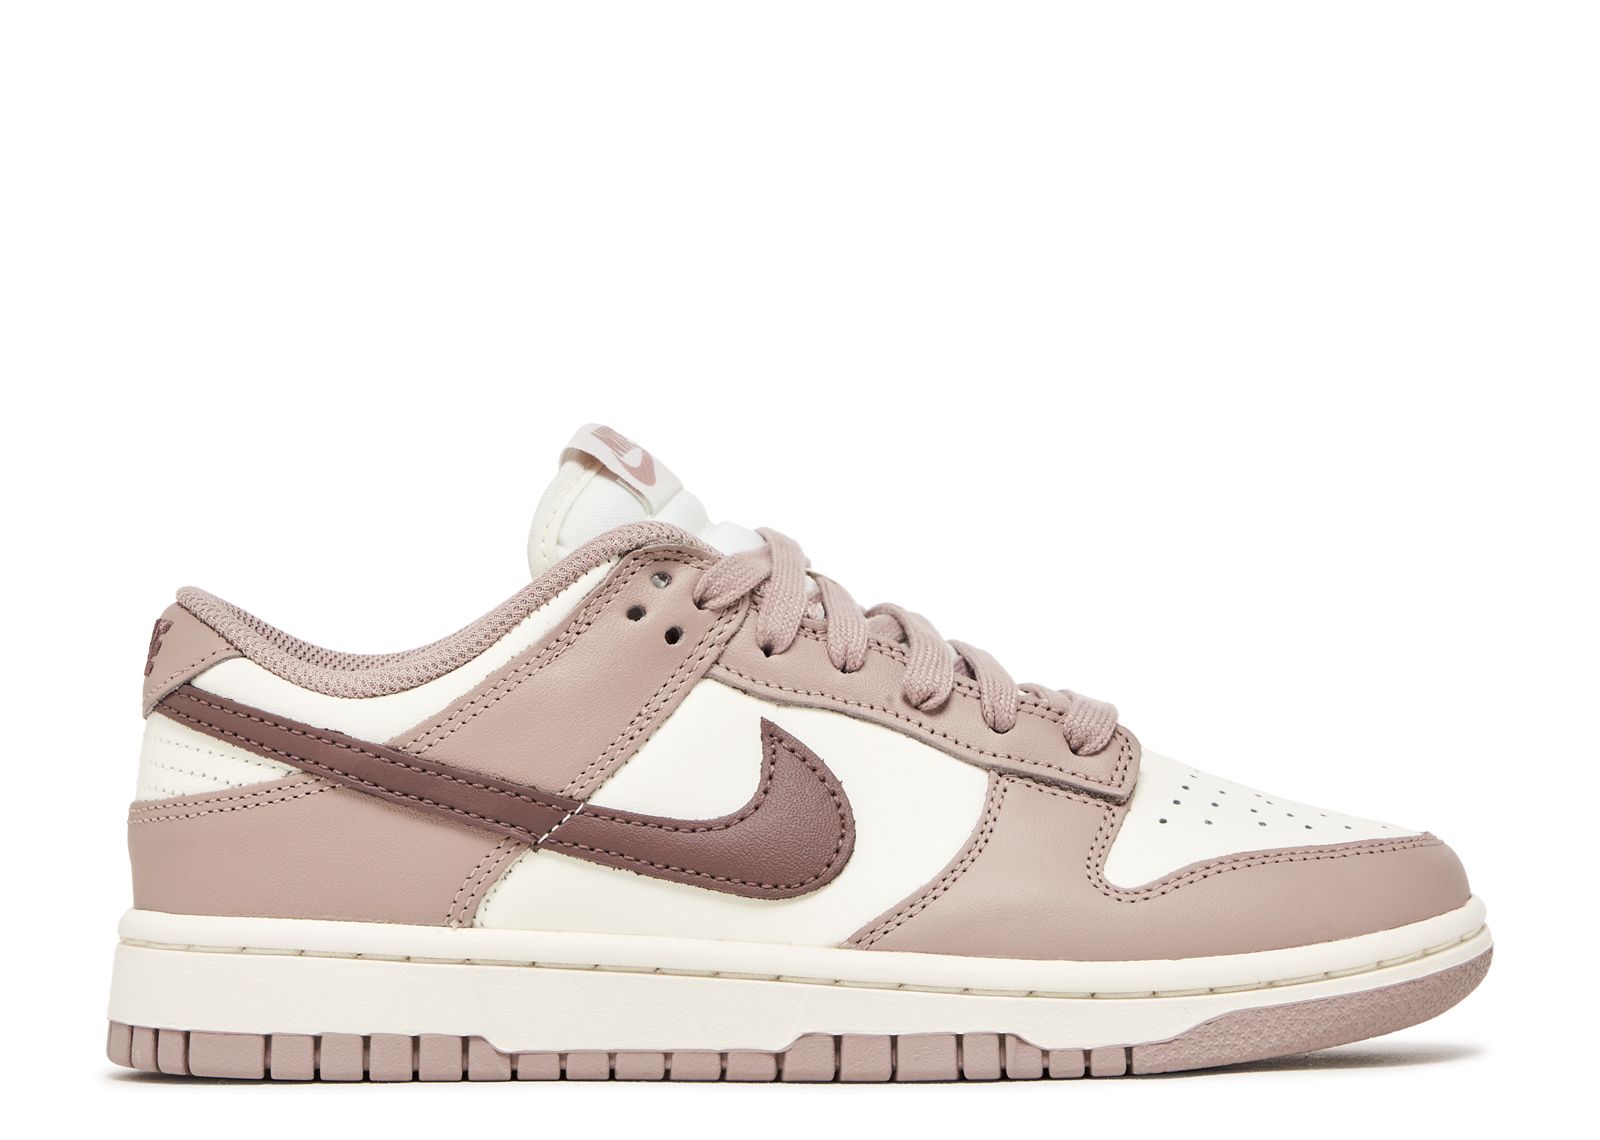 Wmns Dunk Low 'Diffused Taupe' - Nike - DD1503 125 - sail/plum 